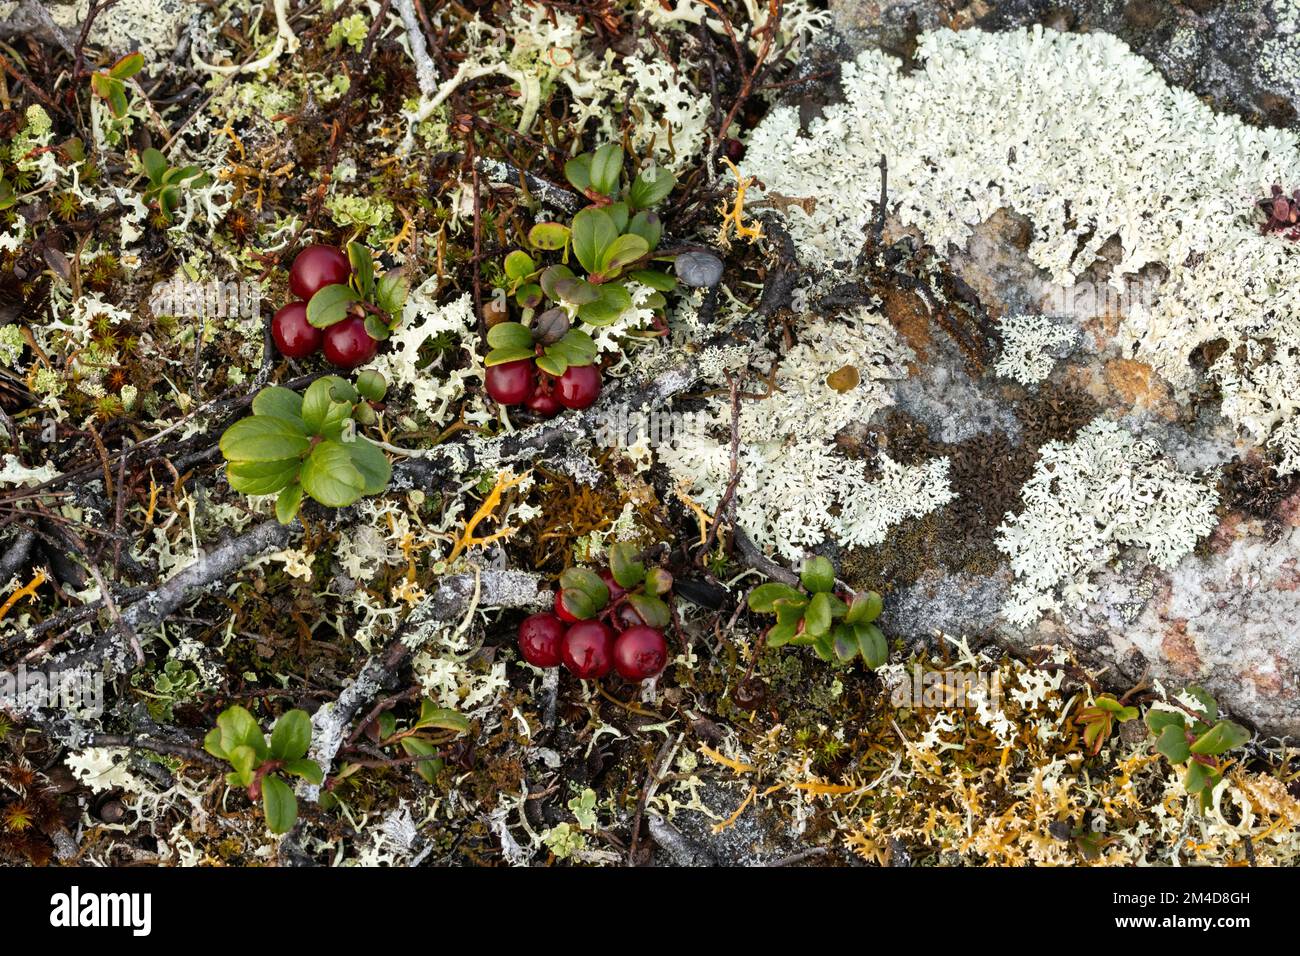 Ripe Lingonberries on a rocky ground on an autumn day in Urho Kekkonen National Park, Northern Finland Stock Photo